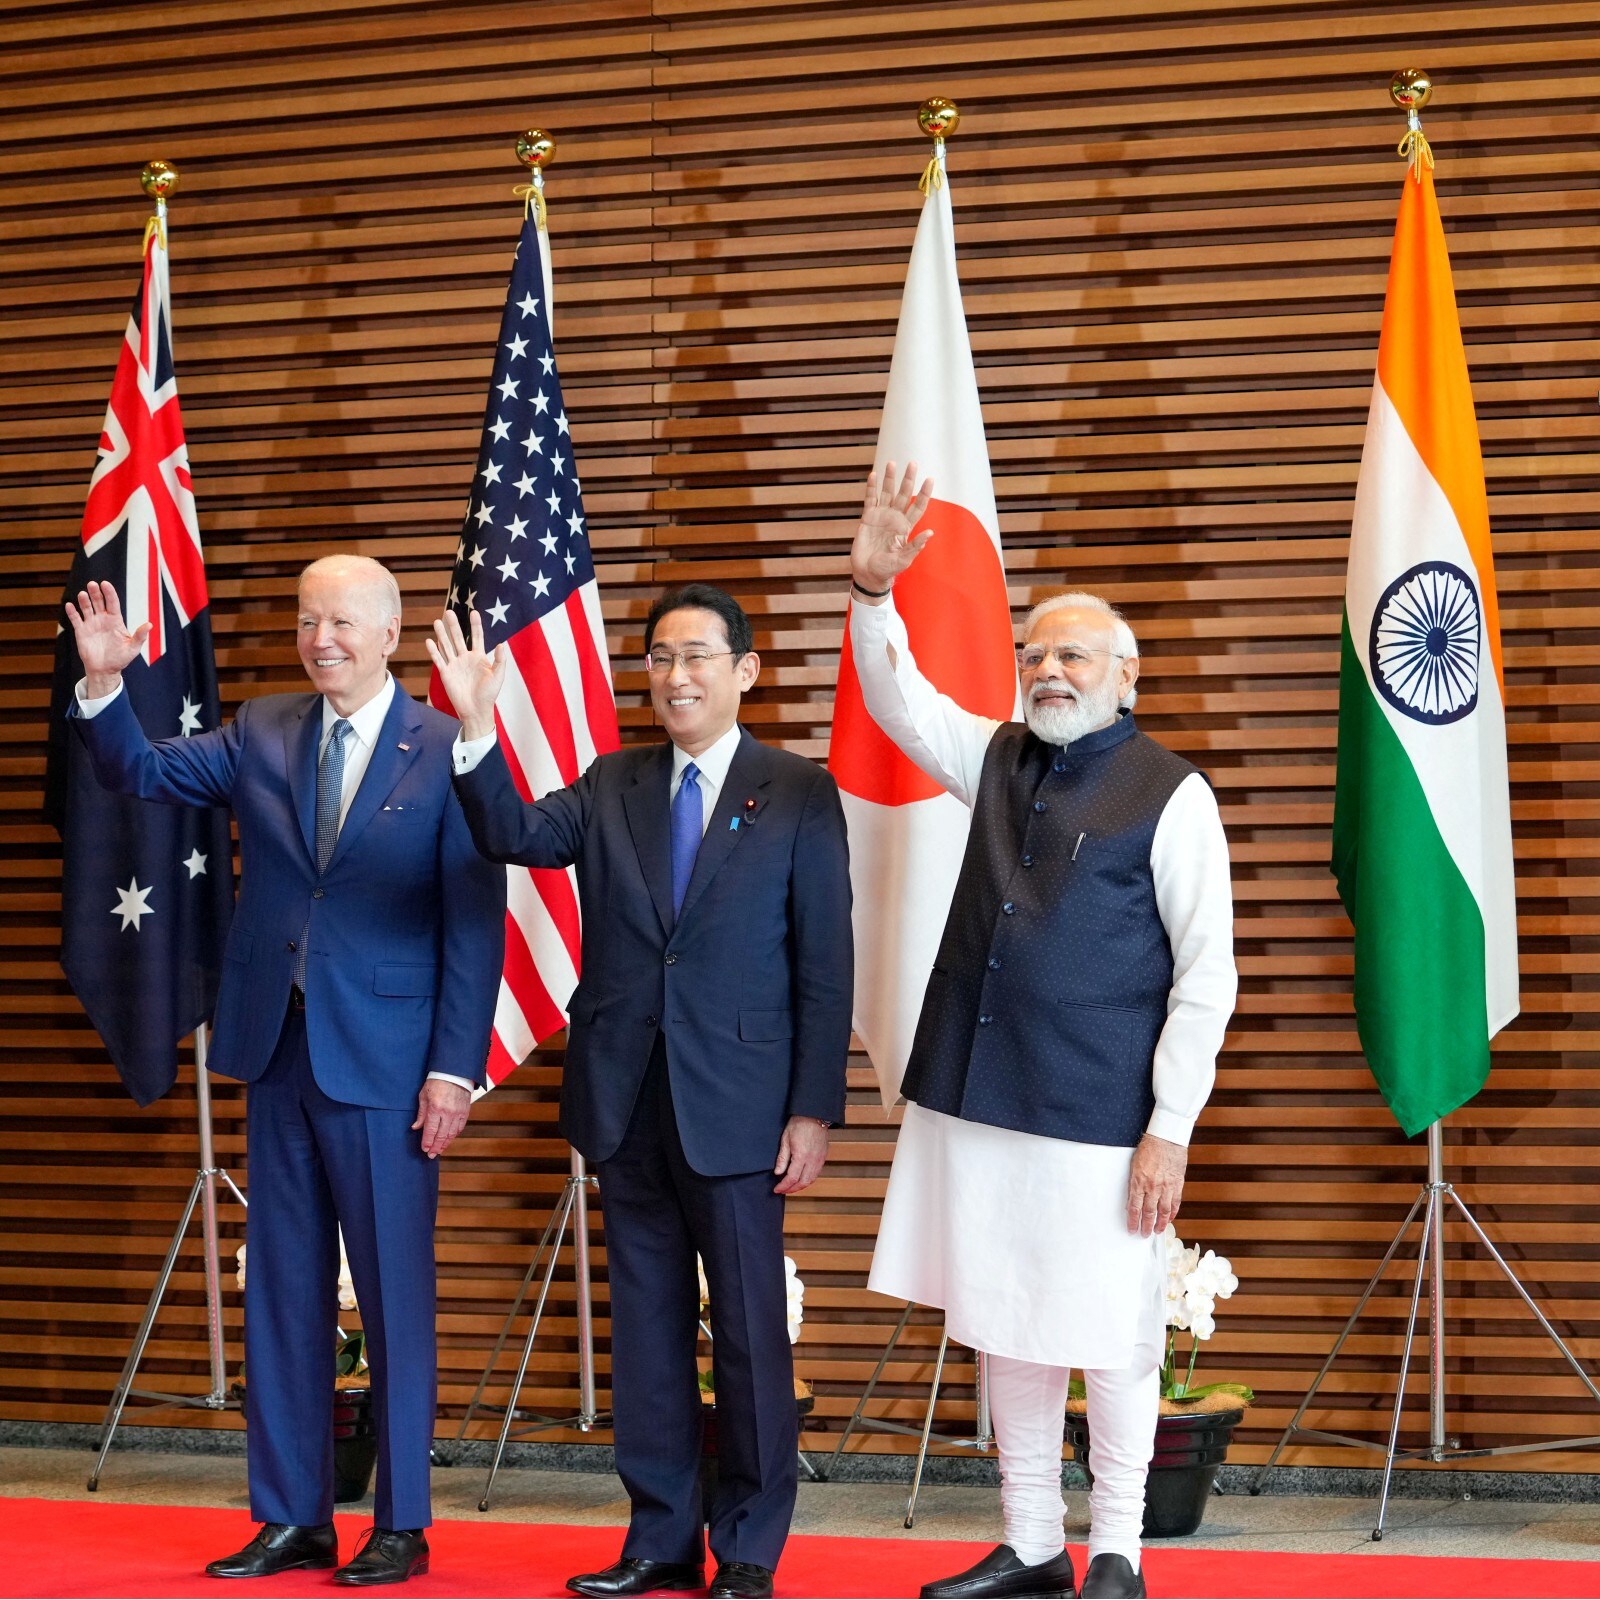 India's Relationship With the Quad